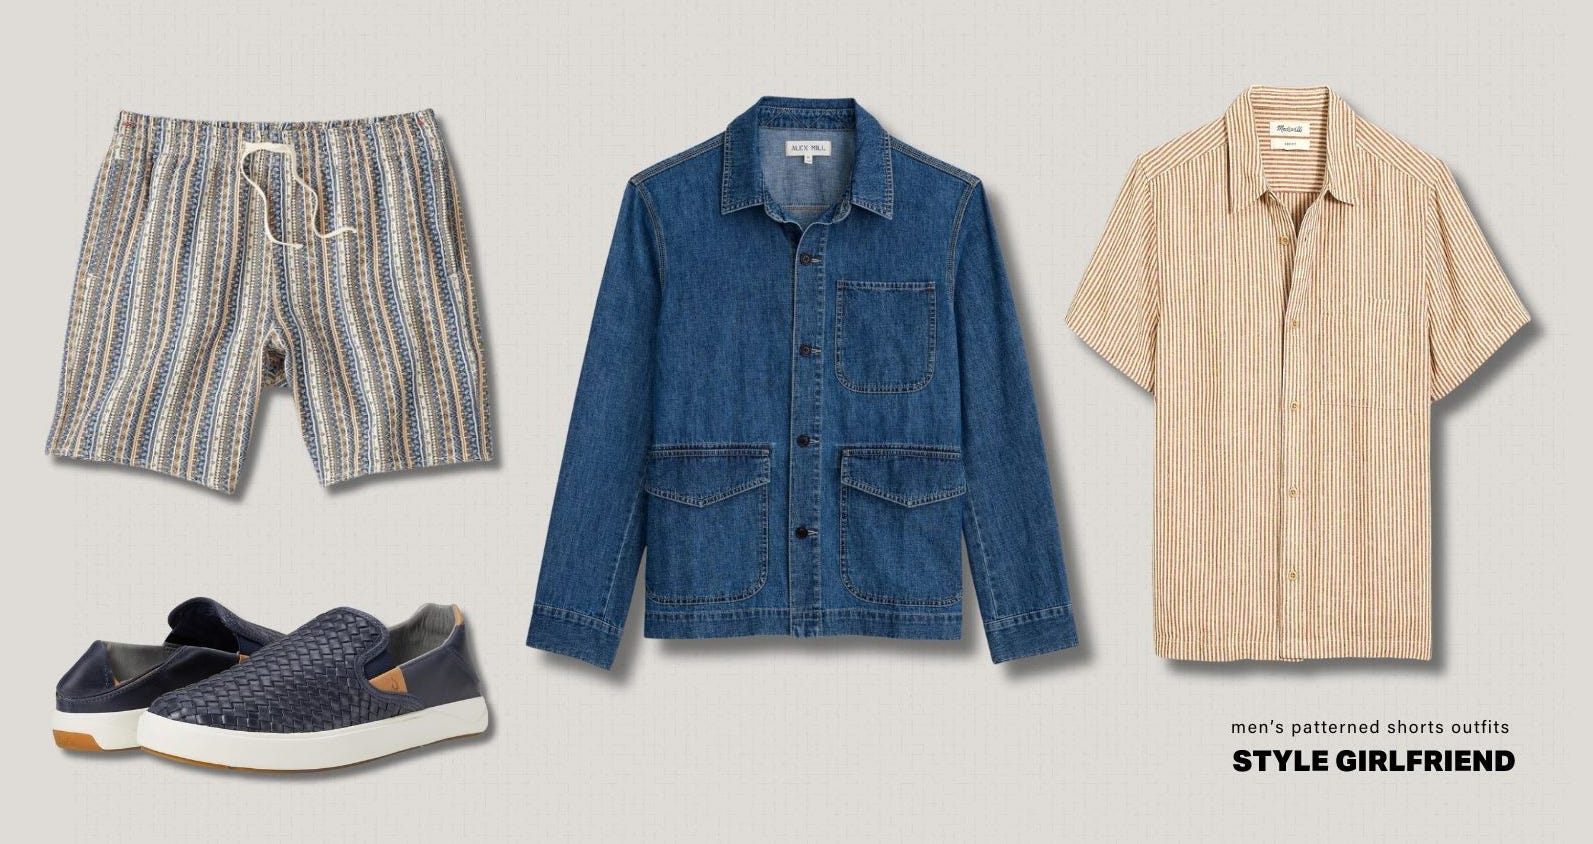 men's spring outfit featuring patterned shorts, an orange short sleeve shirt, denim overshirt, and leather slip-on shoes